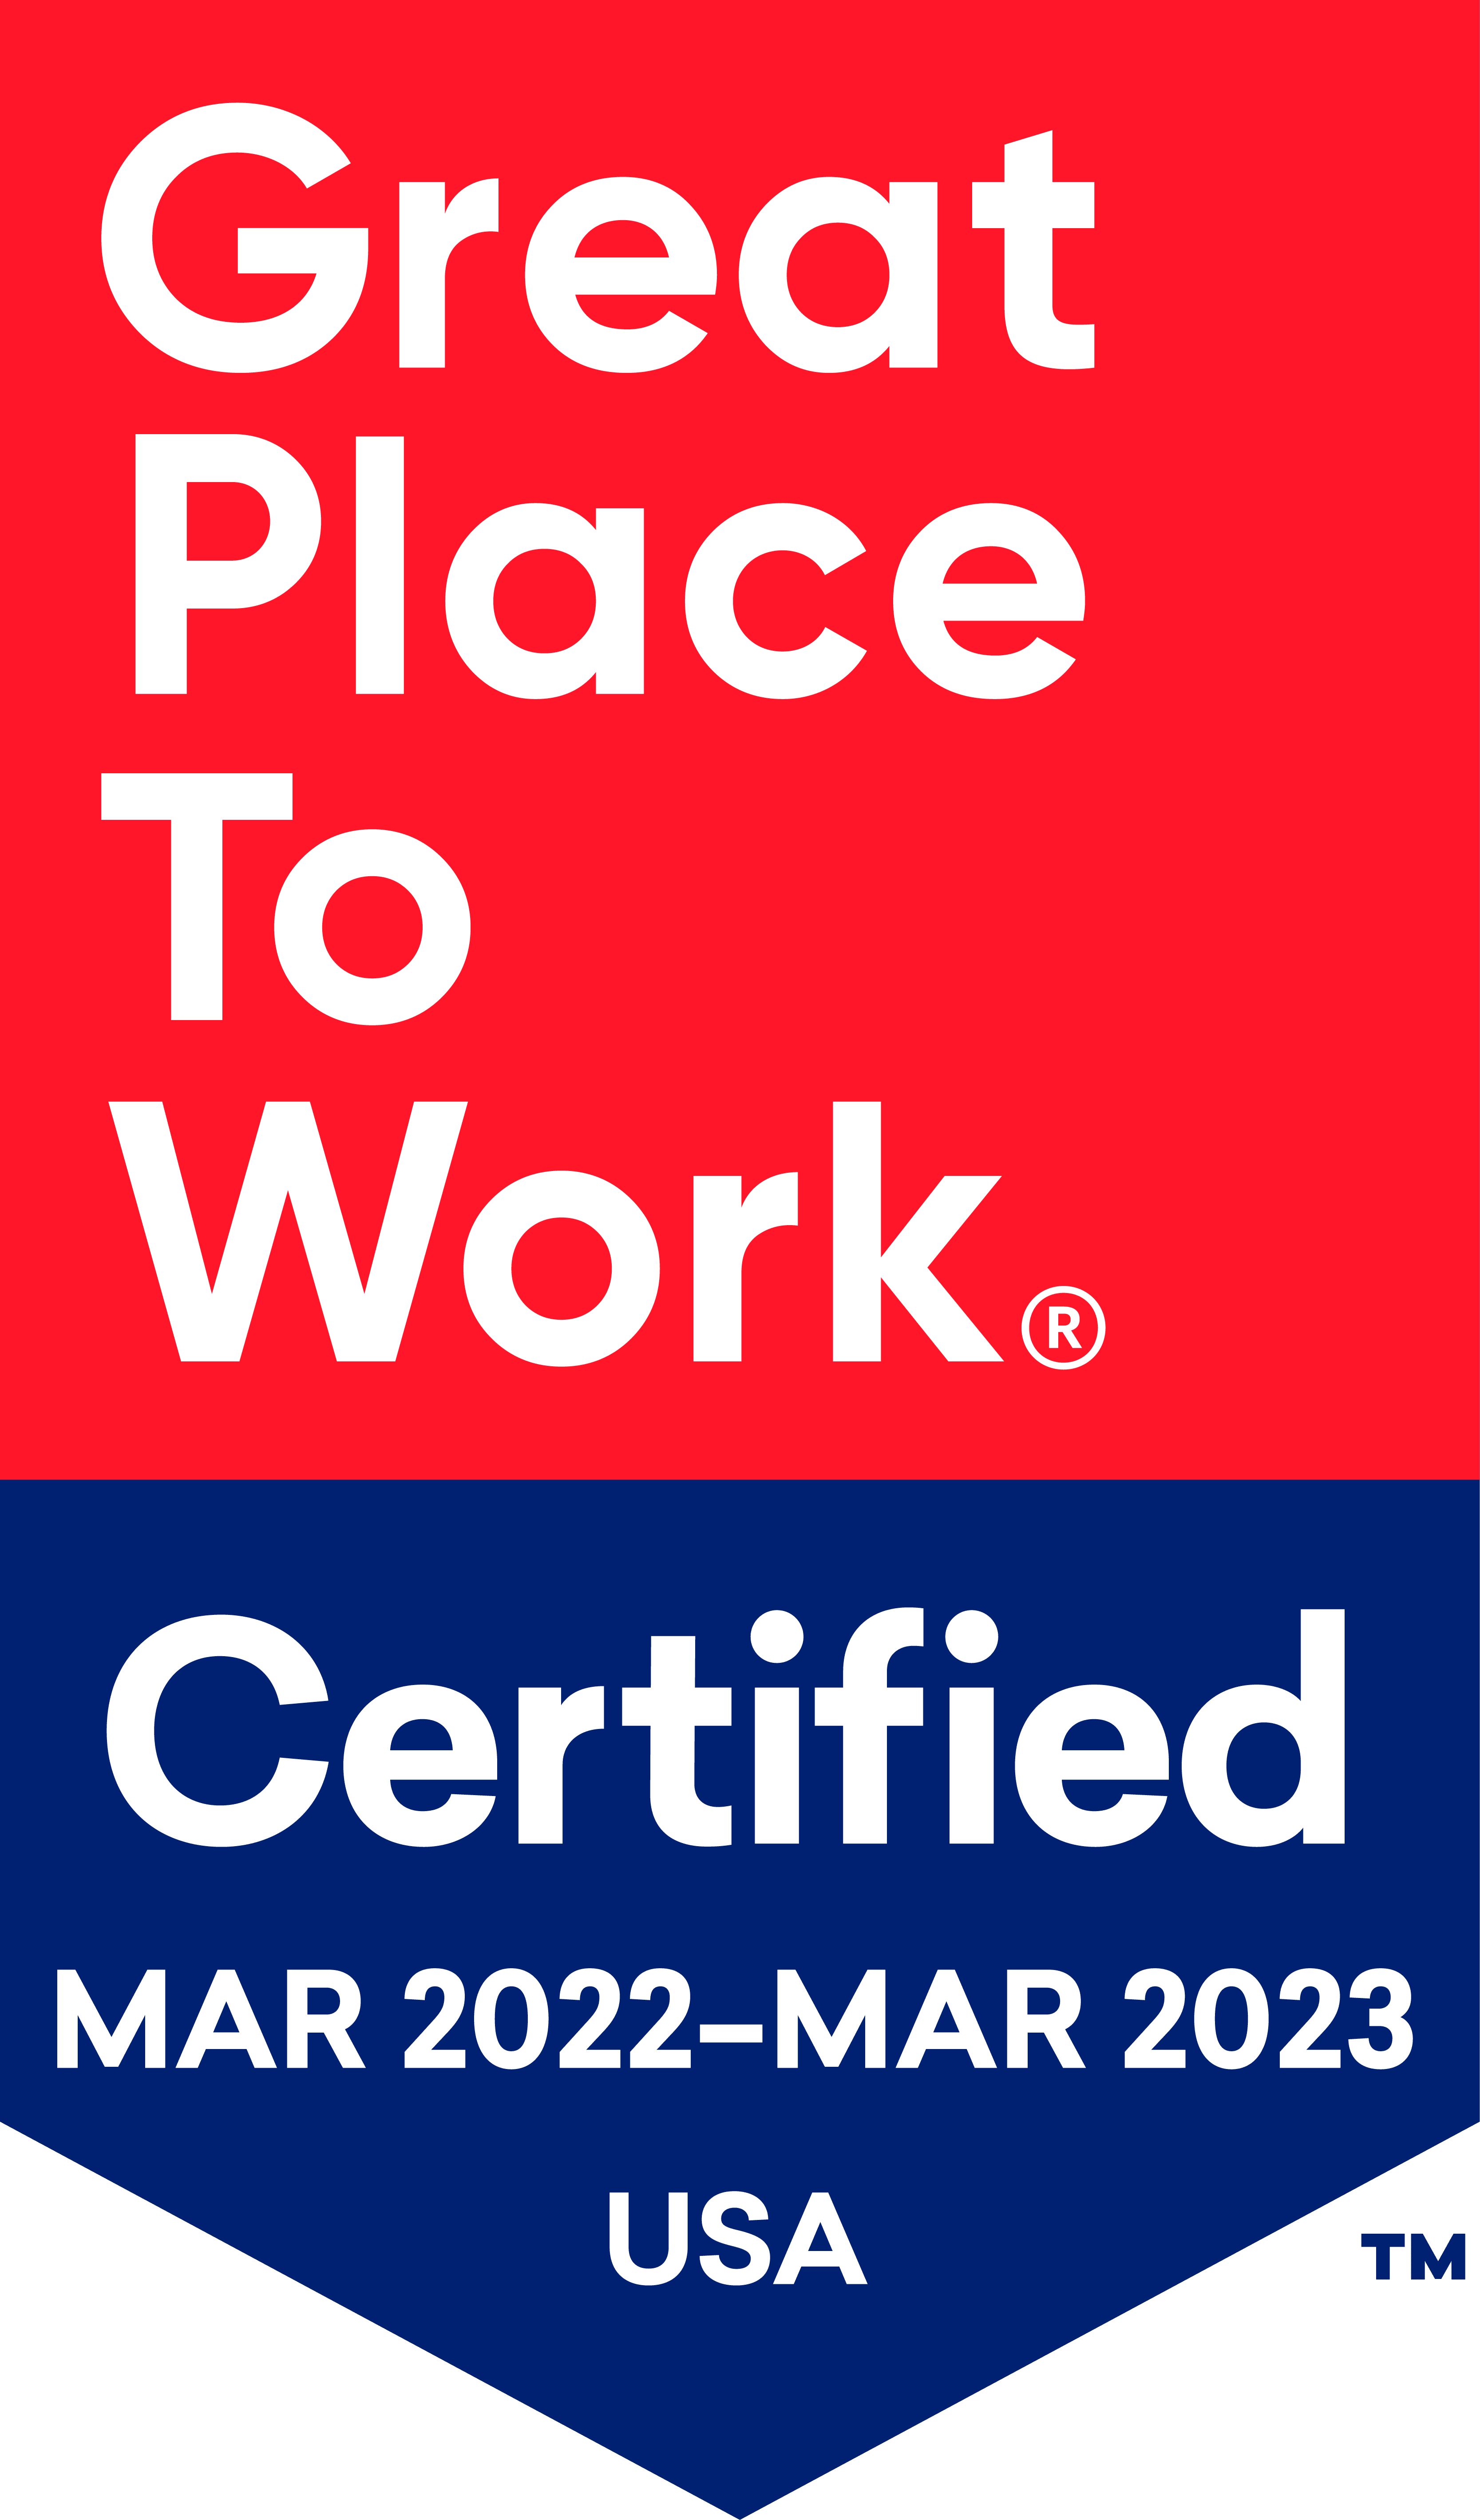 Great place to work badge for The Keystones of Cedar Rapids